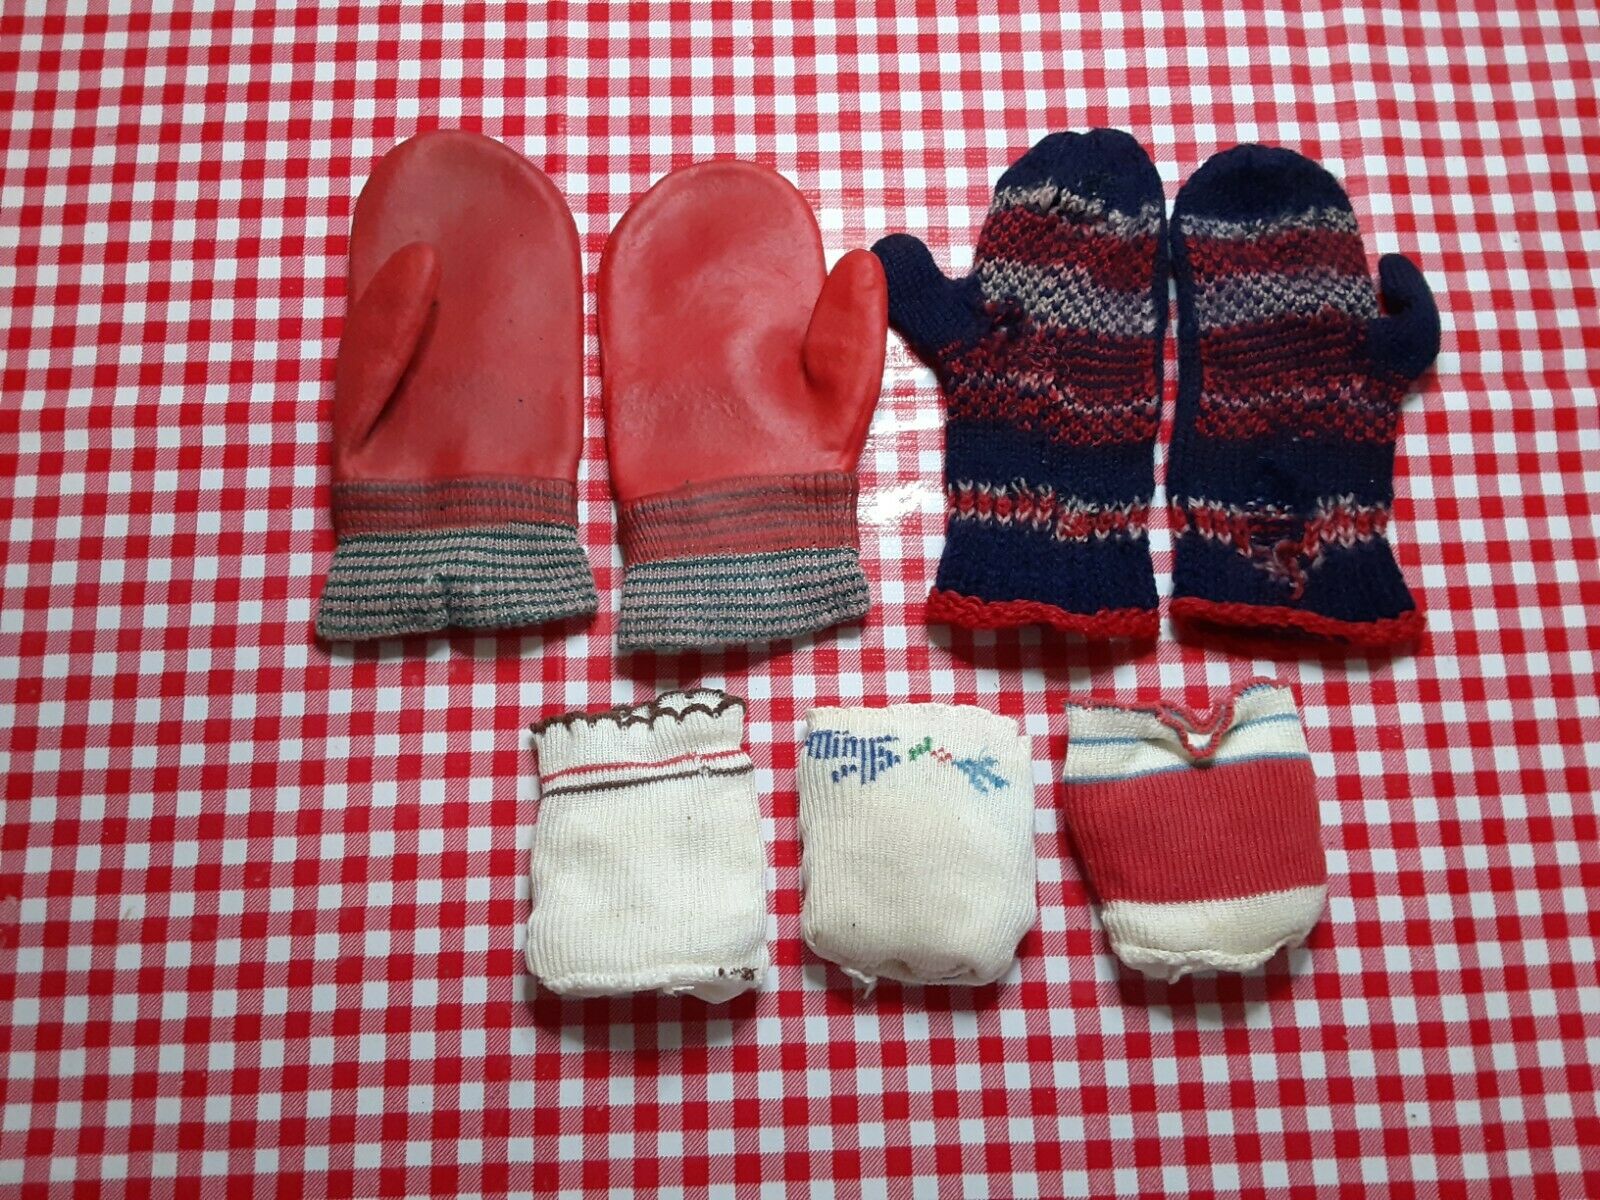 Vintage 40's/50's Children's Mittens And Socks